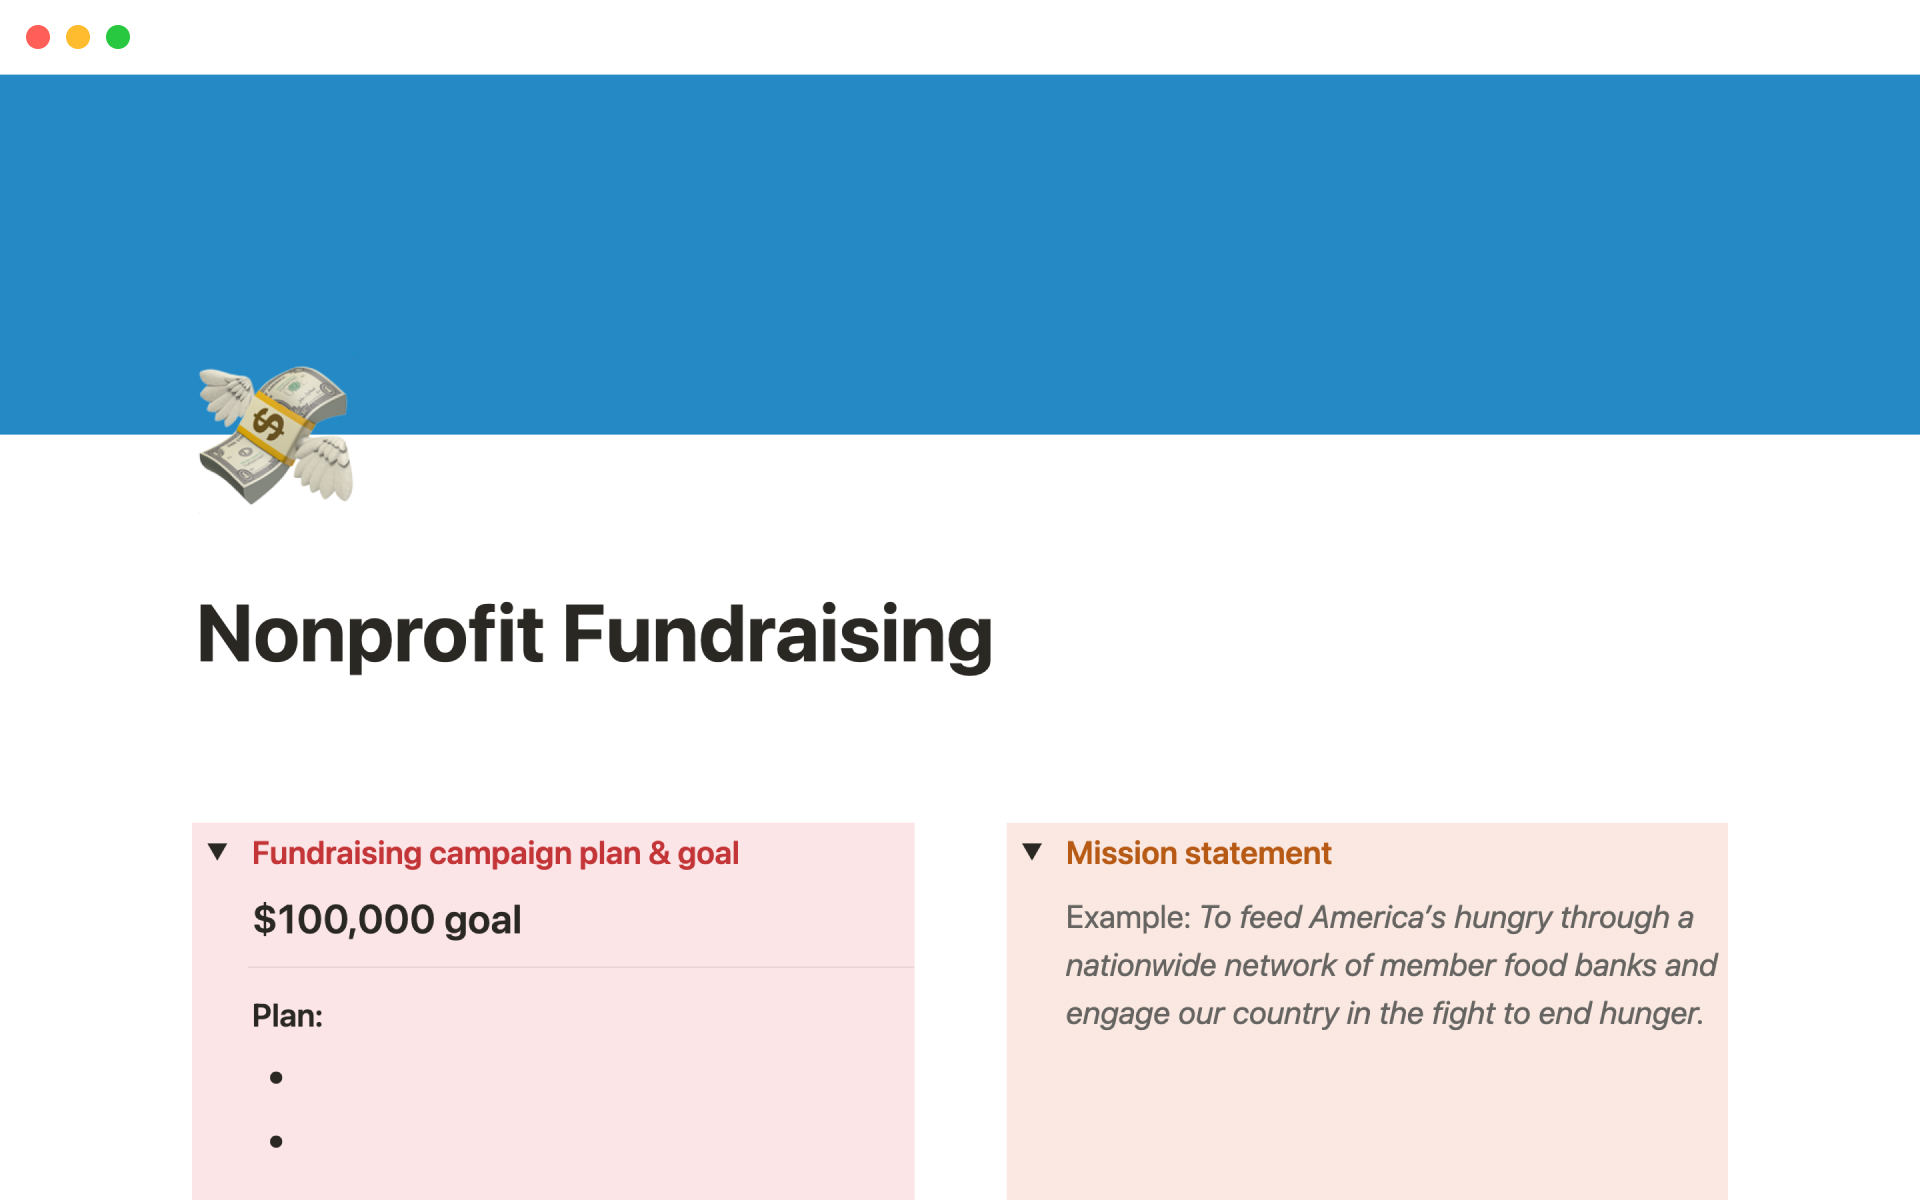 The desktop image for the Nonprofit fundraising template